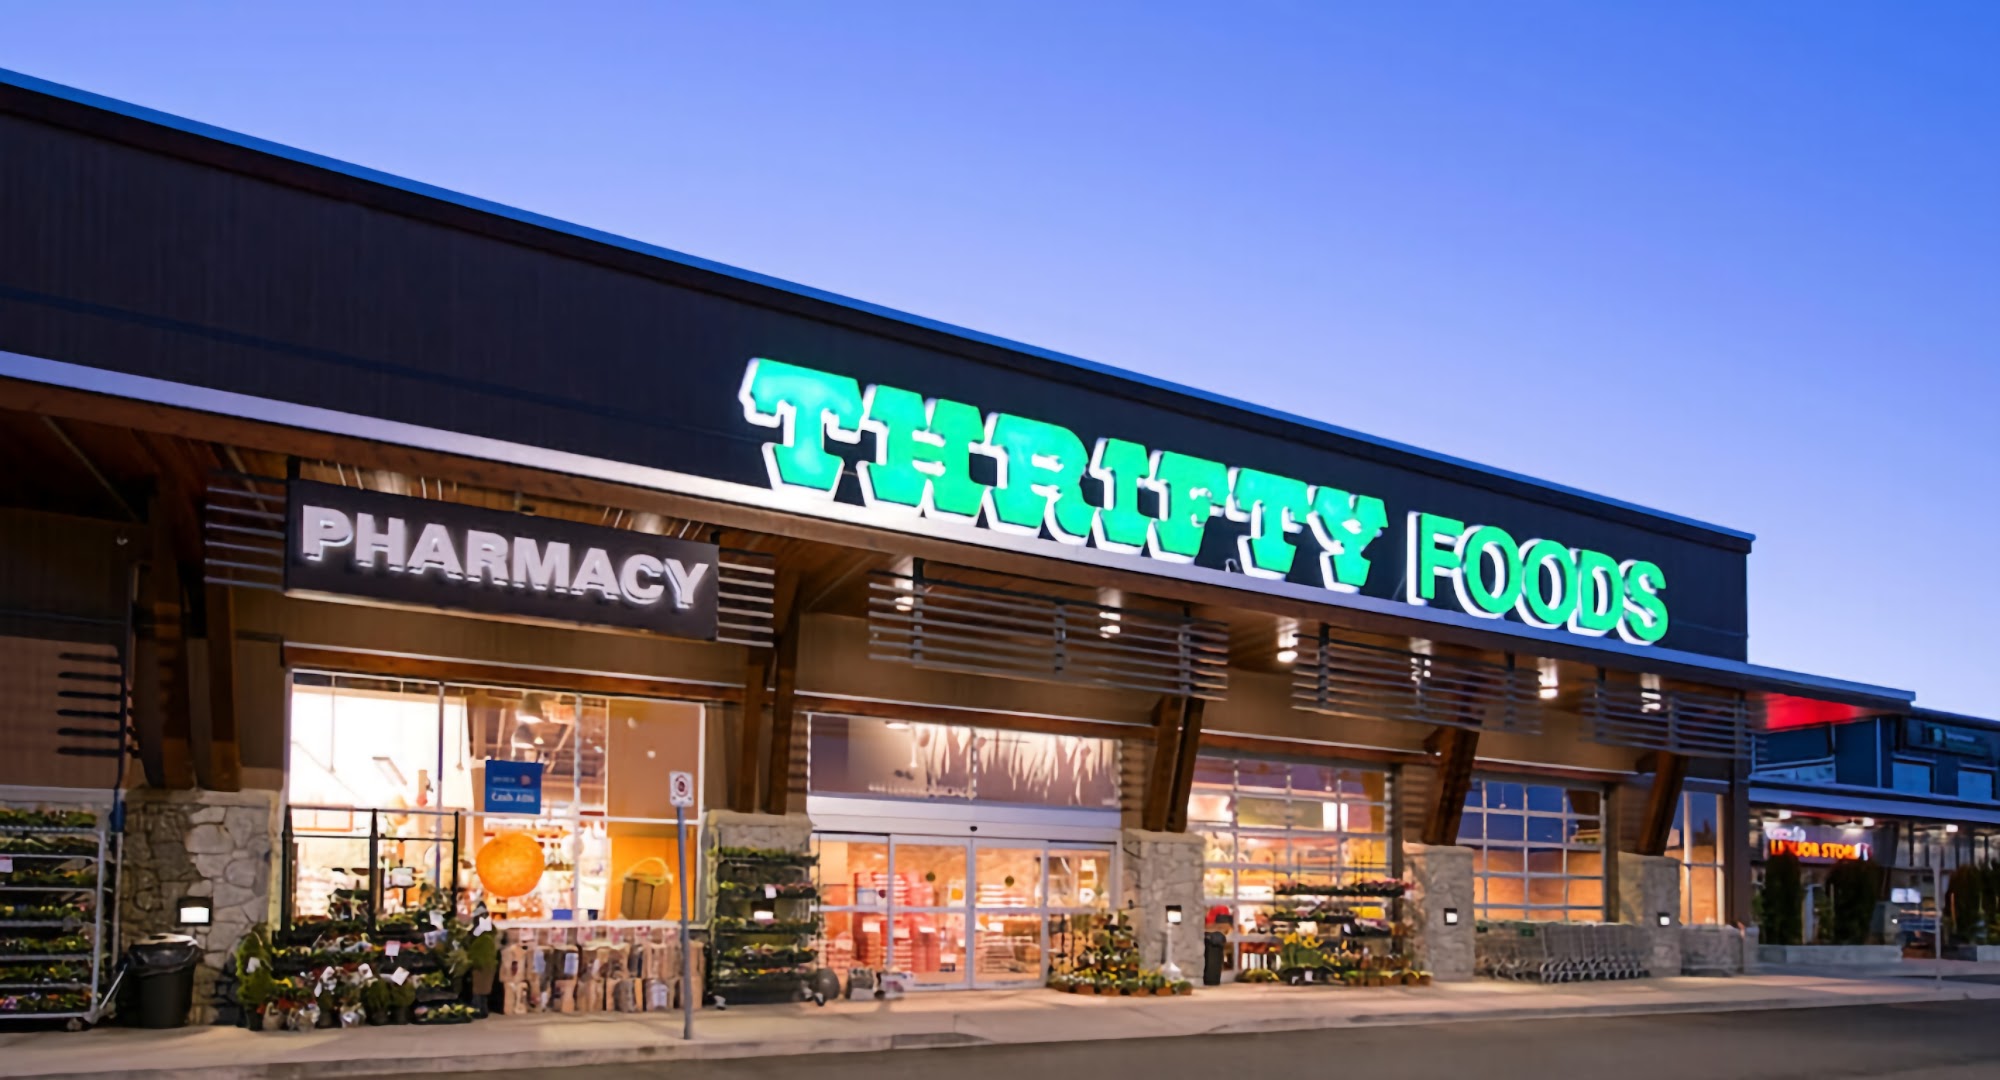 Thrifty Foods Crown Isle Pharmacy